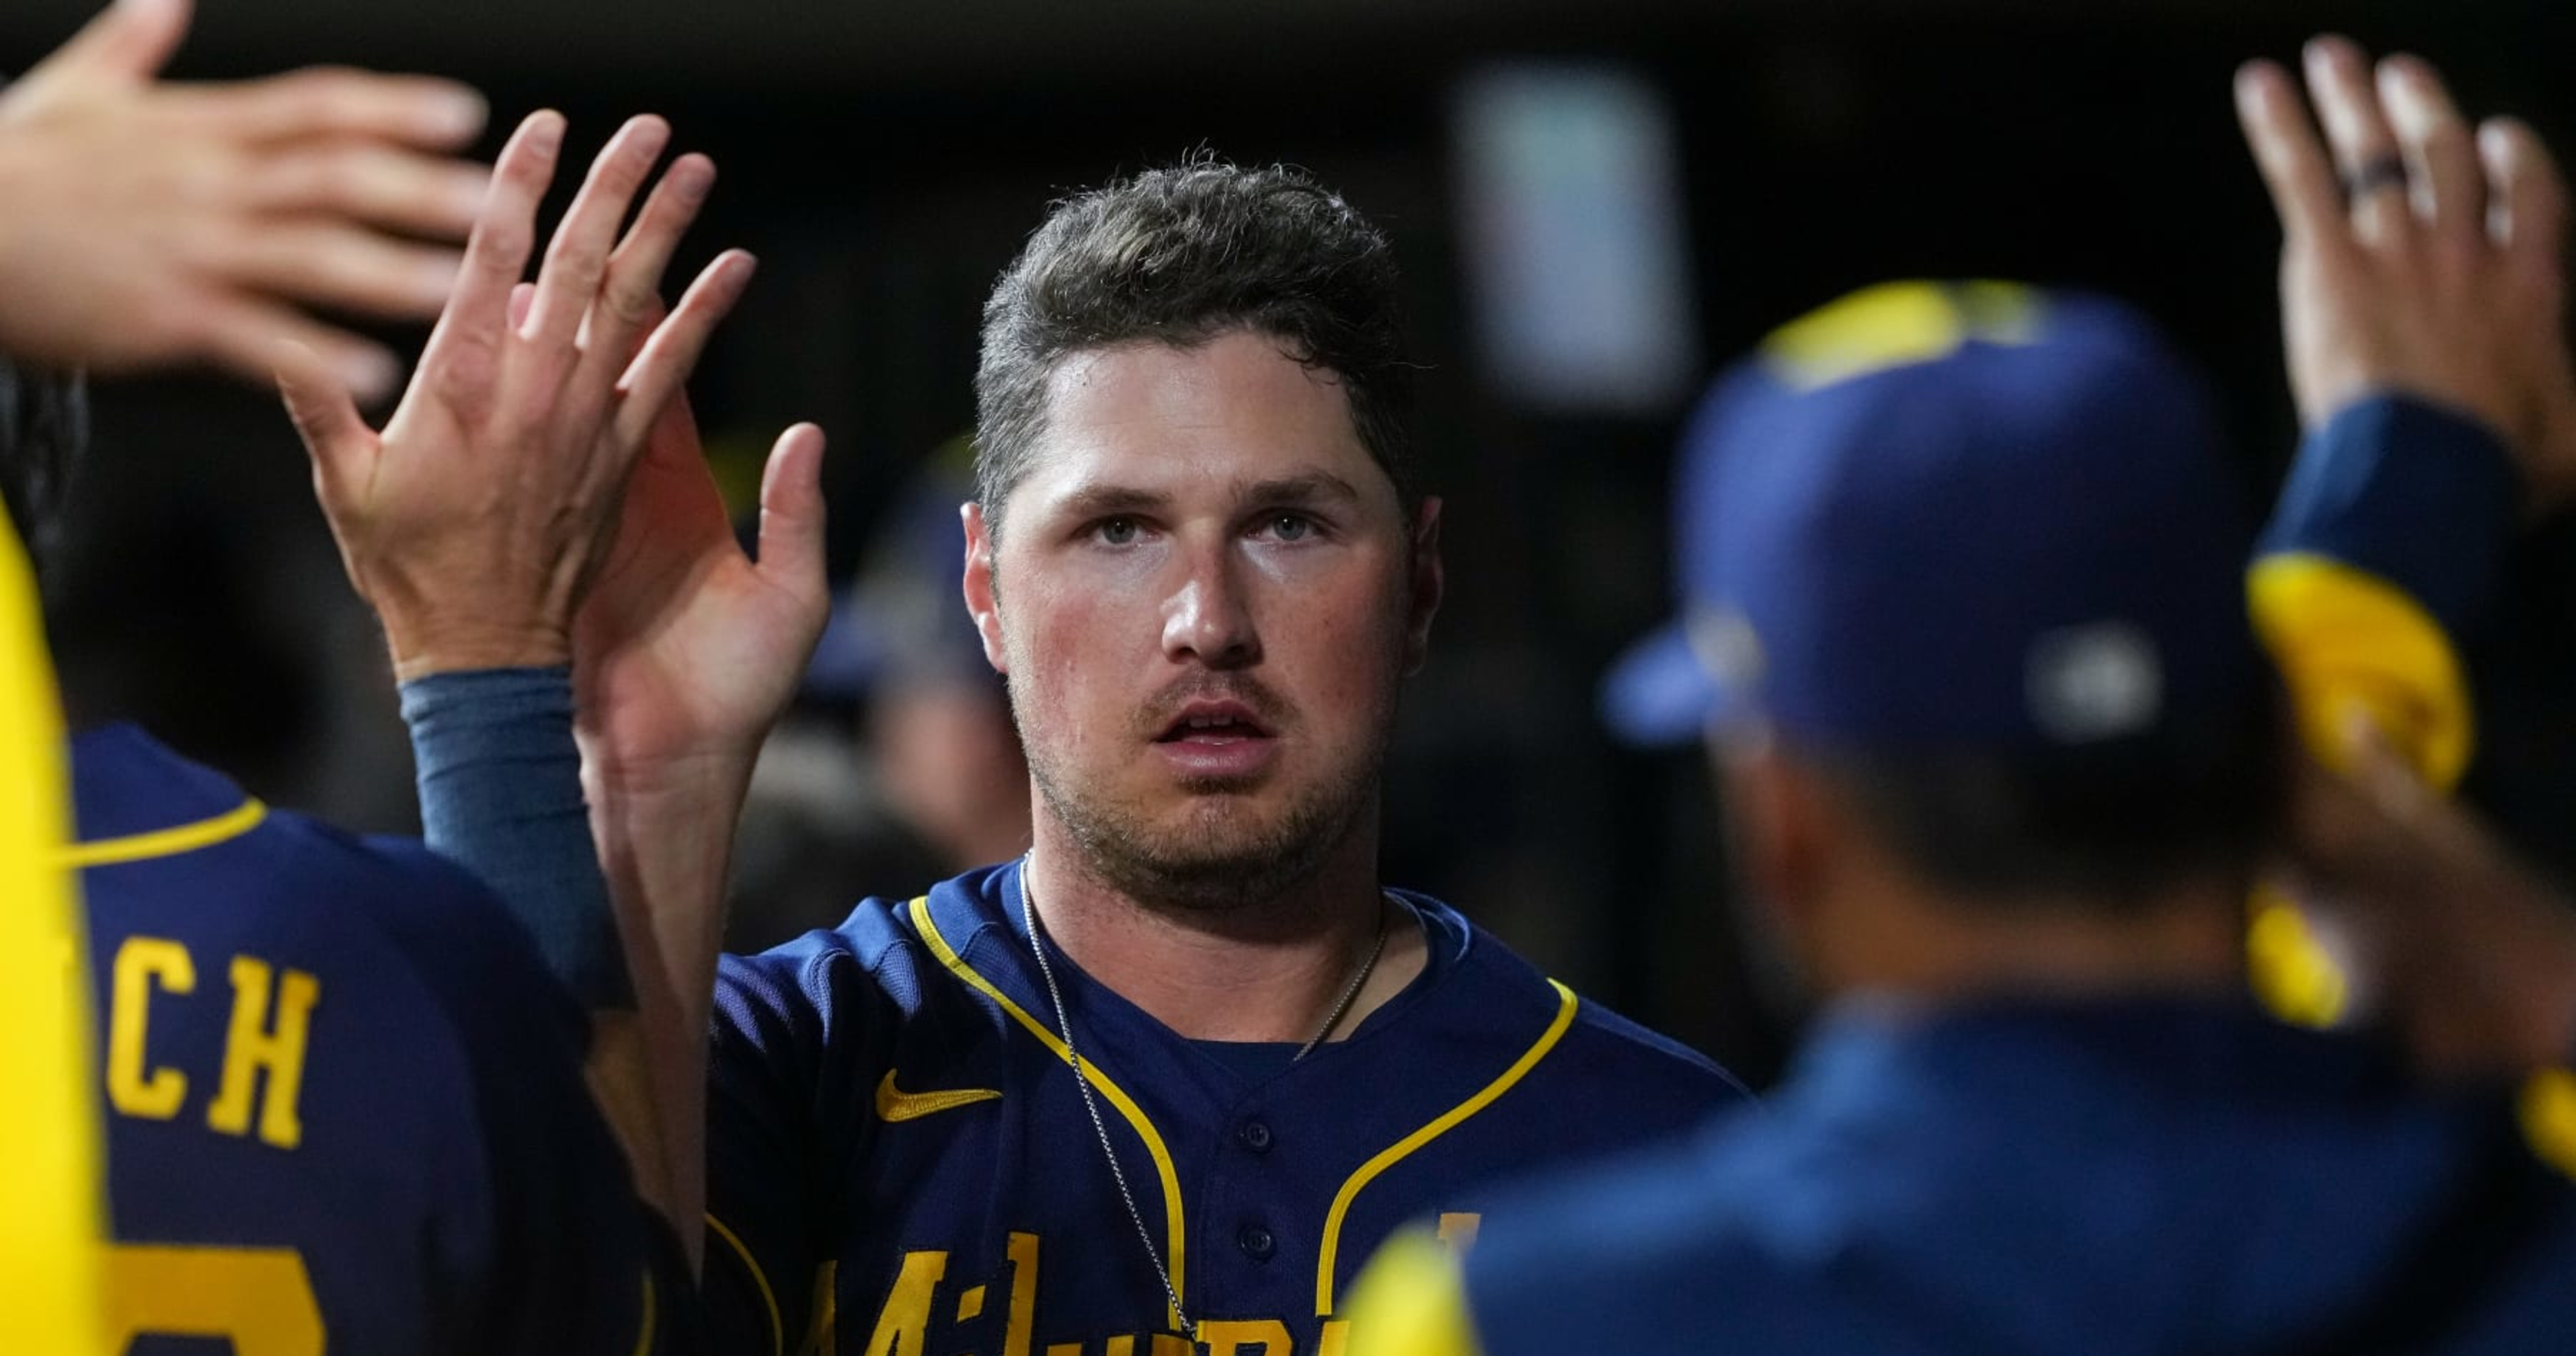 Trade Analysis: Brewers use Hunter Renfroe to bolster pitching depth, but  they cannot replace his bat internally - Brew Crew Ball